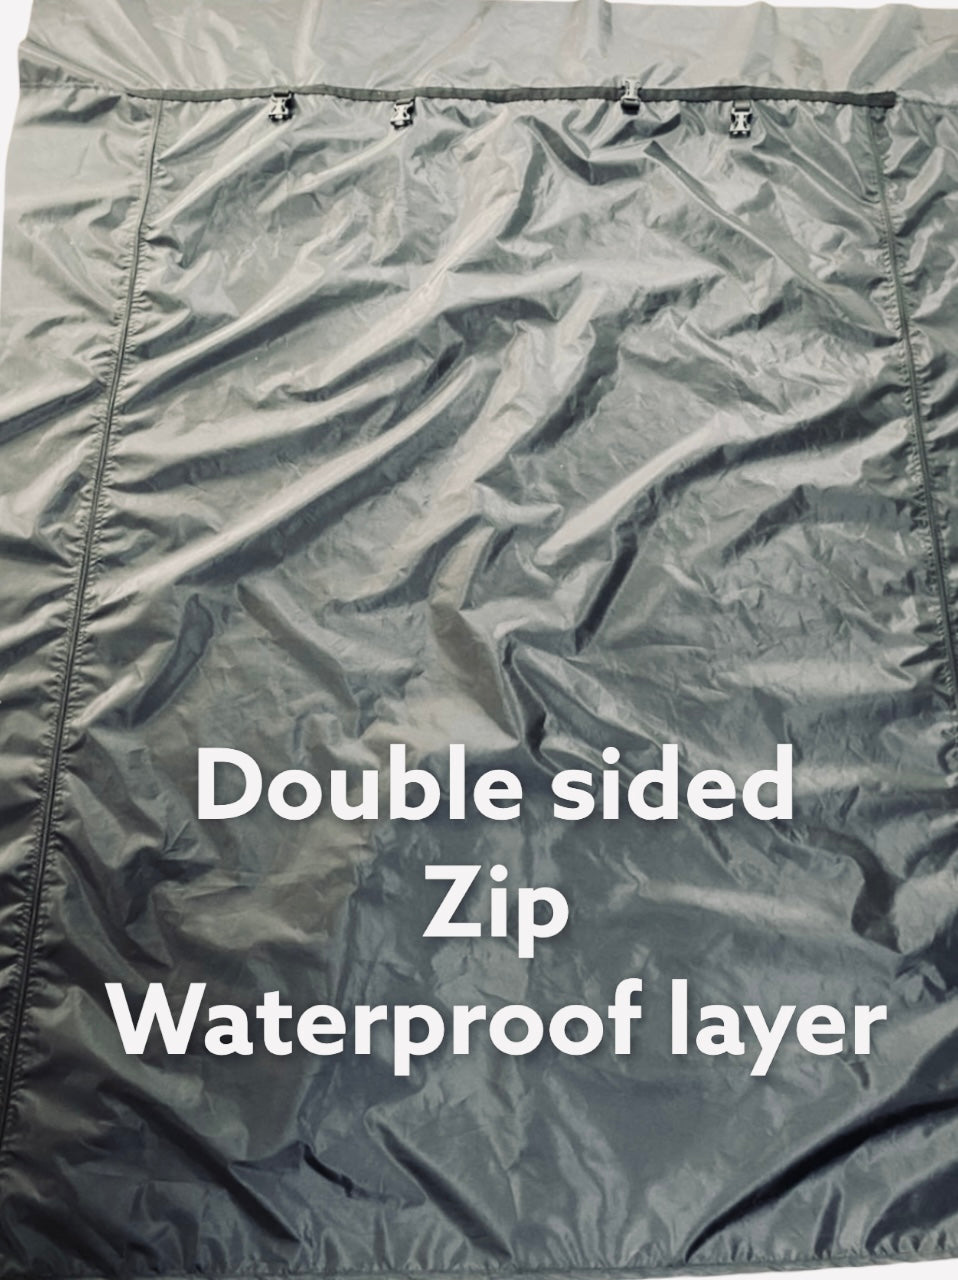 VANdoûr Universal Medium & Large Size Campervan 4 in 1 Mosquito / Fly Net + Waterproof / Privacy Layer, to fit either side or rear.